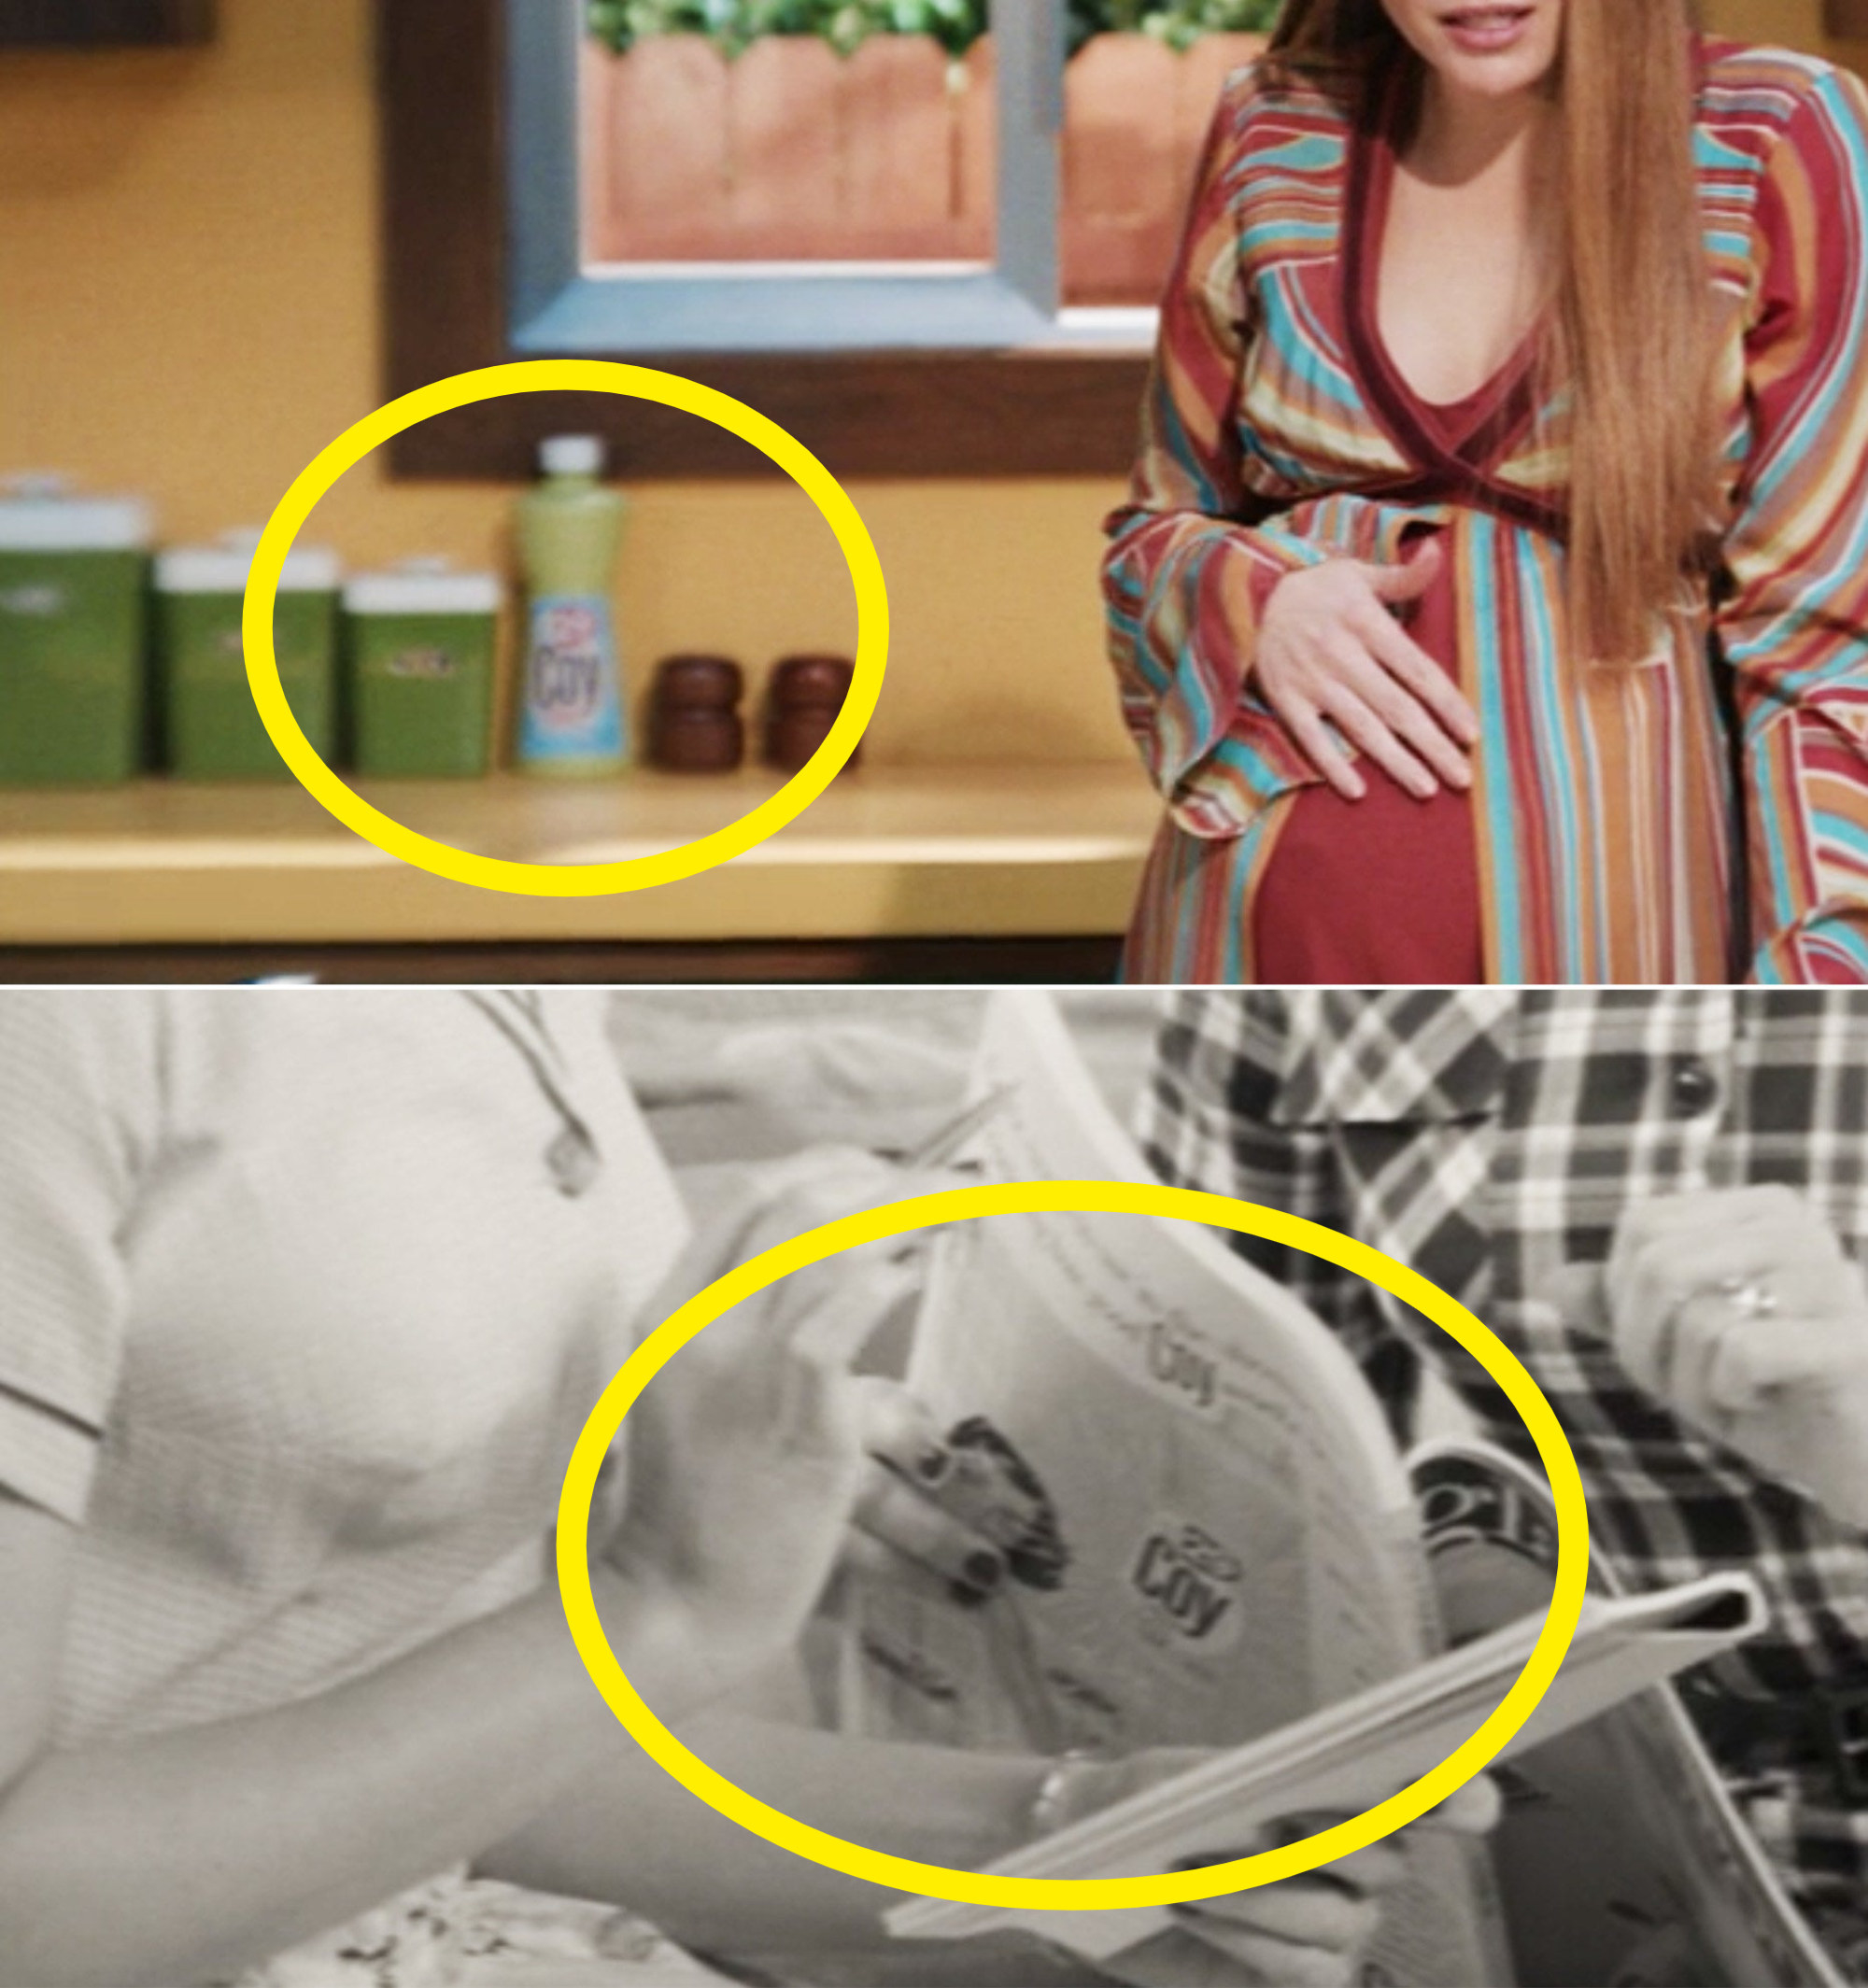 The Coy soap on the counter behind Wanda vs. the Coy soap ad in Episode 1